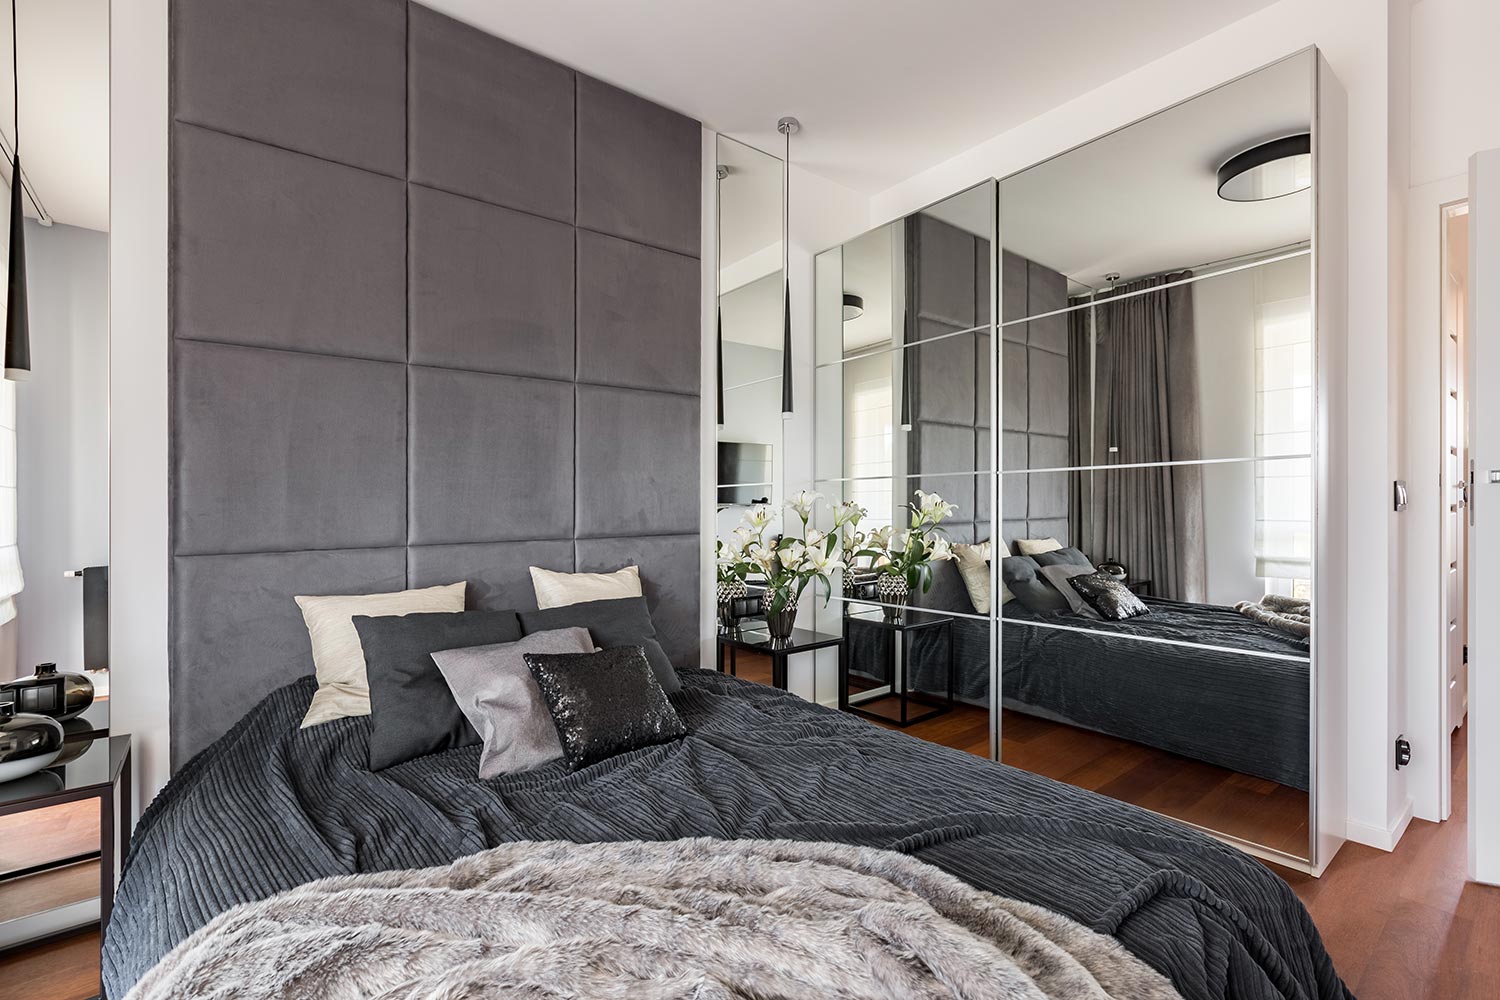 Luxurious bedroom with mirrored wardrobe, double bed and upholstered wall